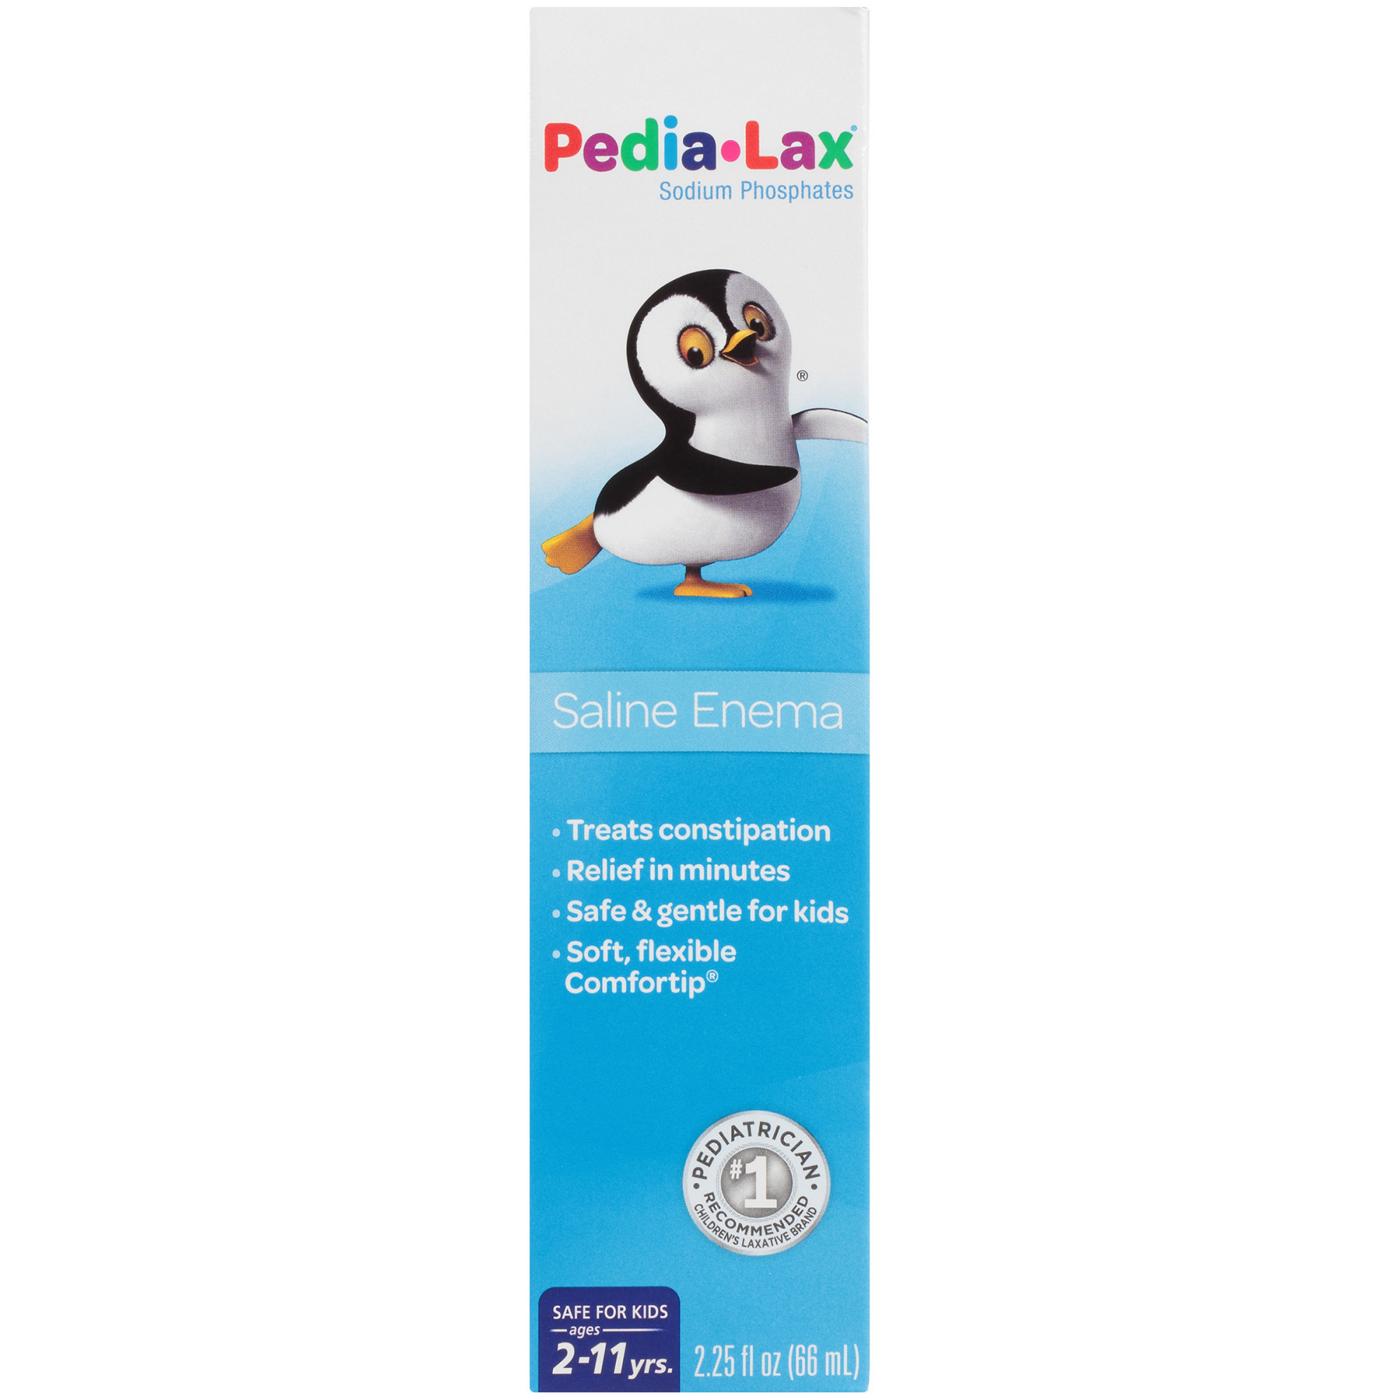 Pedia-Lax Laxative Liquid Glycerin Suppositories for Kids, Ages 2-5 - 6 ct